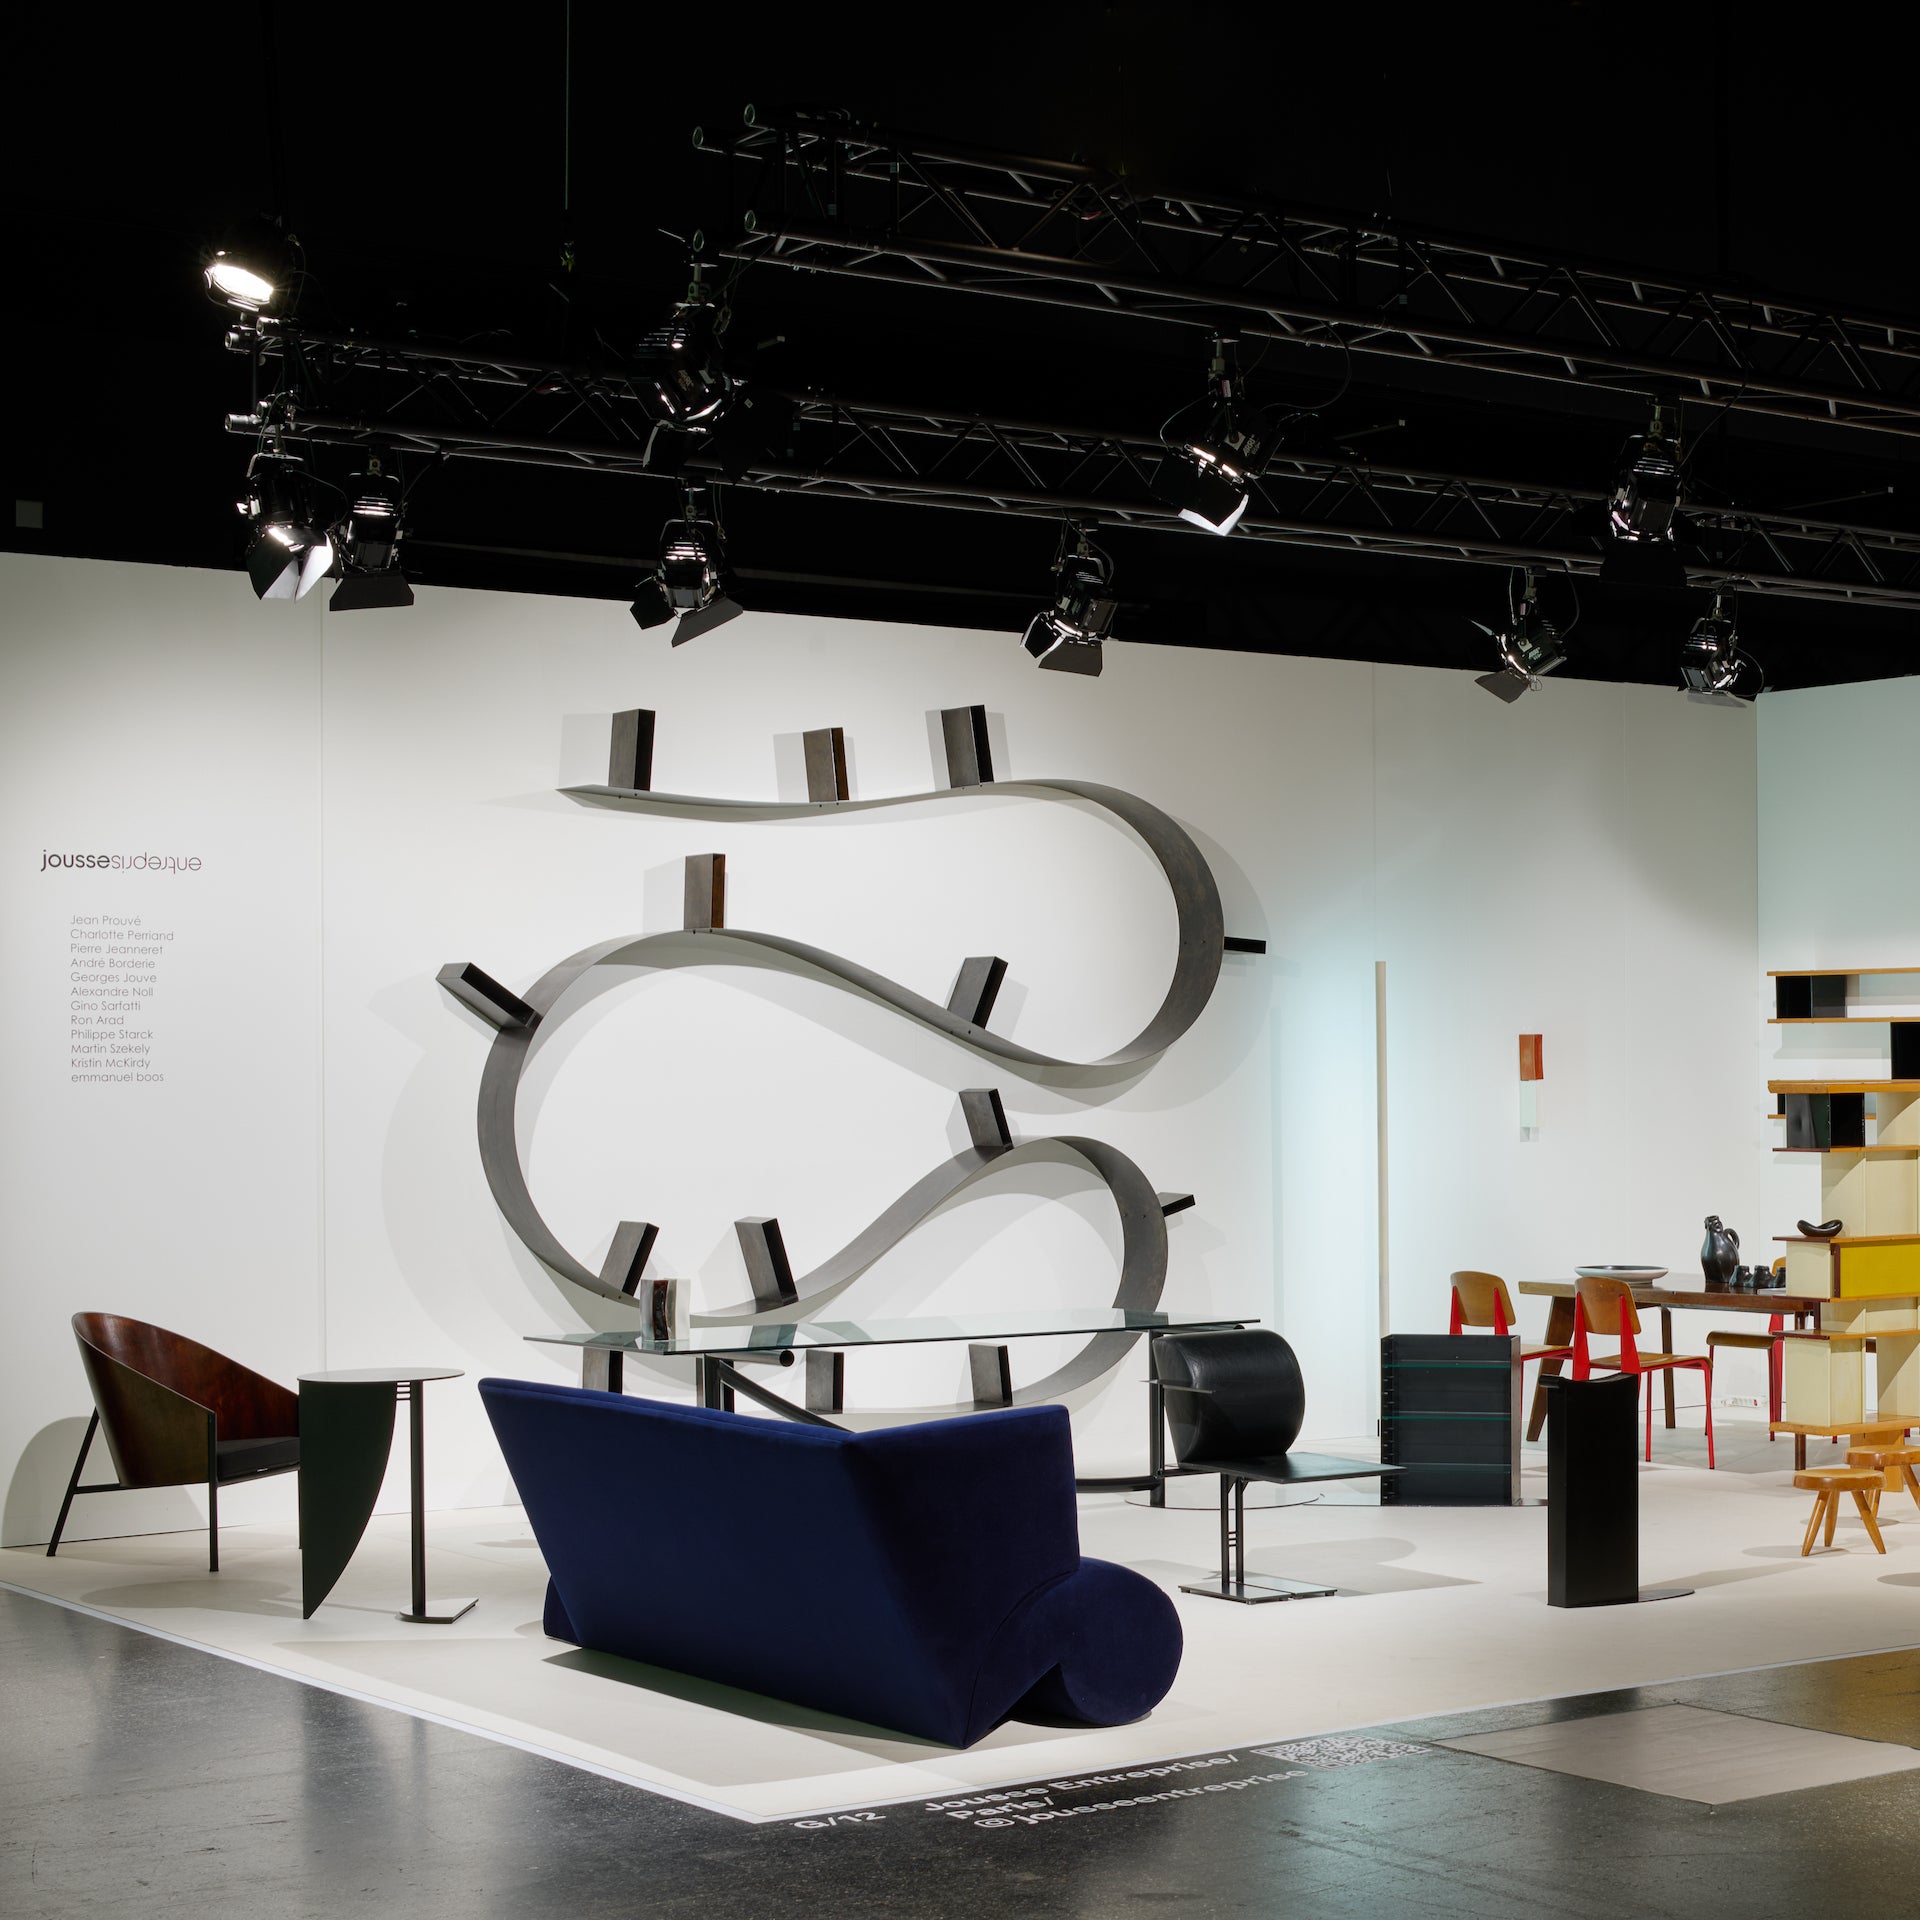 Jousse Entreprise at Design Miami/ Basel 2023, featuring late 20th-century works by Ron Arad, Philippe Starck, and Martin Szekely alongside mid-century works by Charlotte Perriand and Jean Prouvé. Photo © James Harris for Design Miami/ Basel